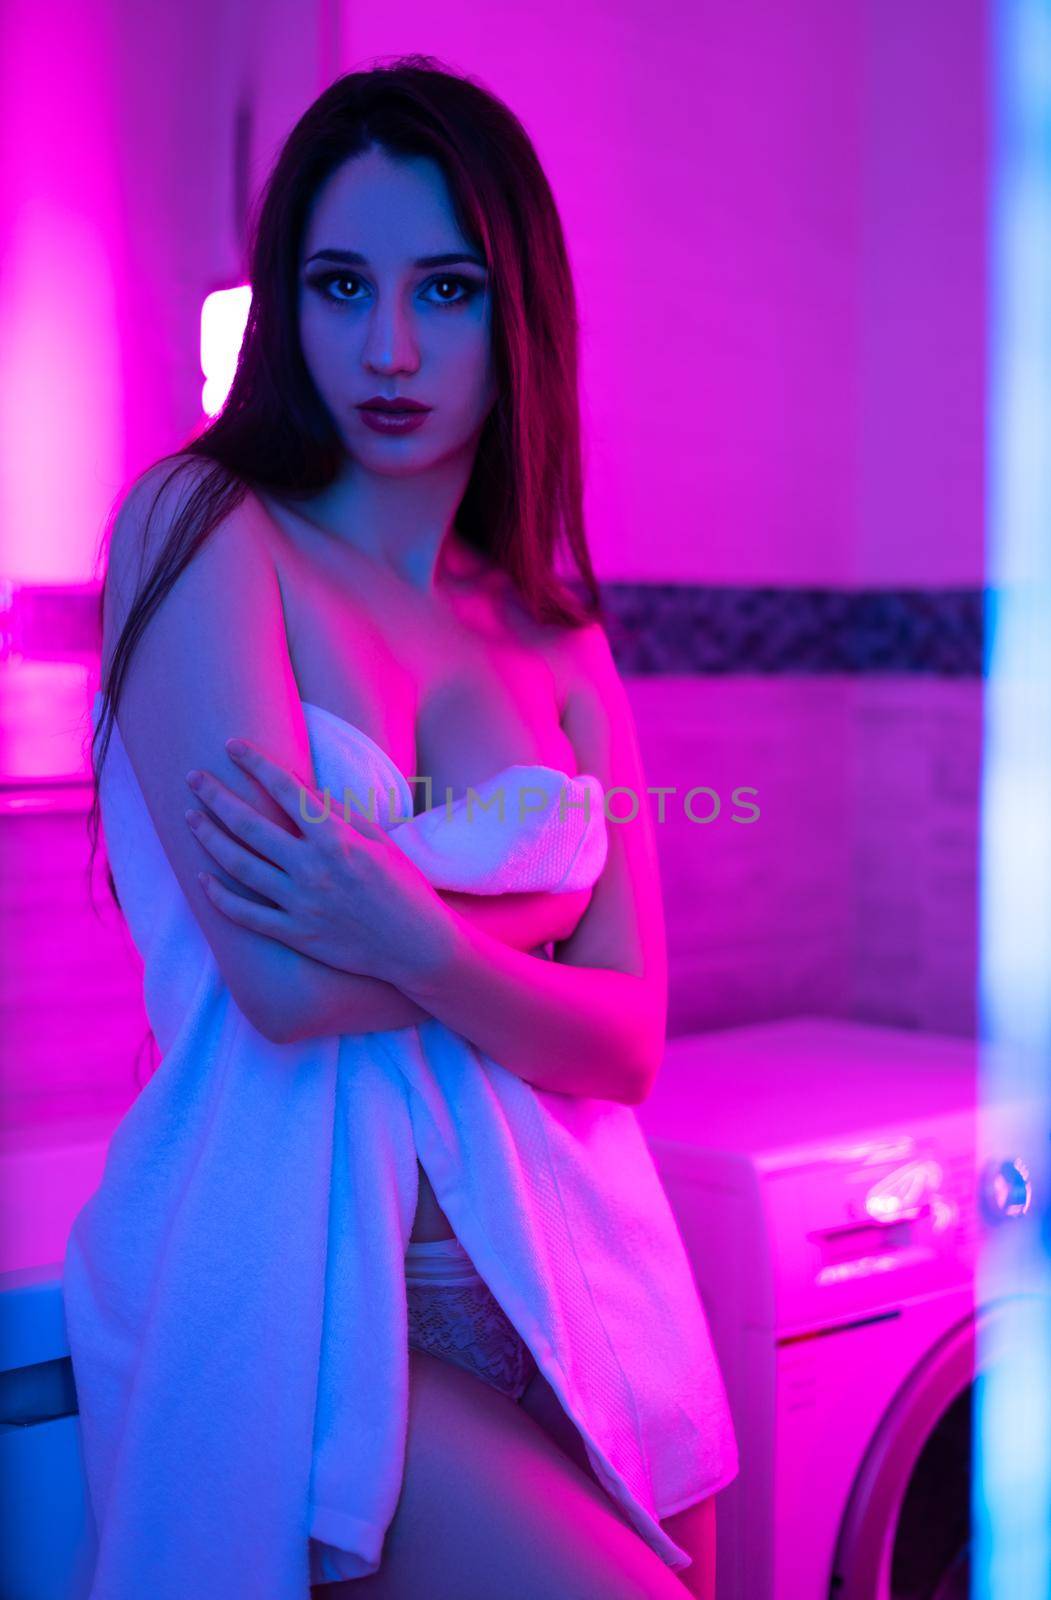 sexy girl with long hair in a white towel in the bathroom with neon light by Rotozey